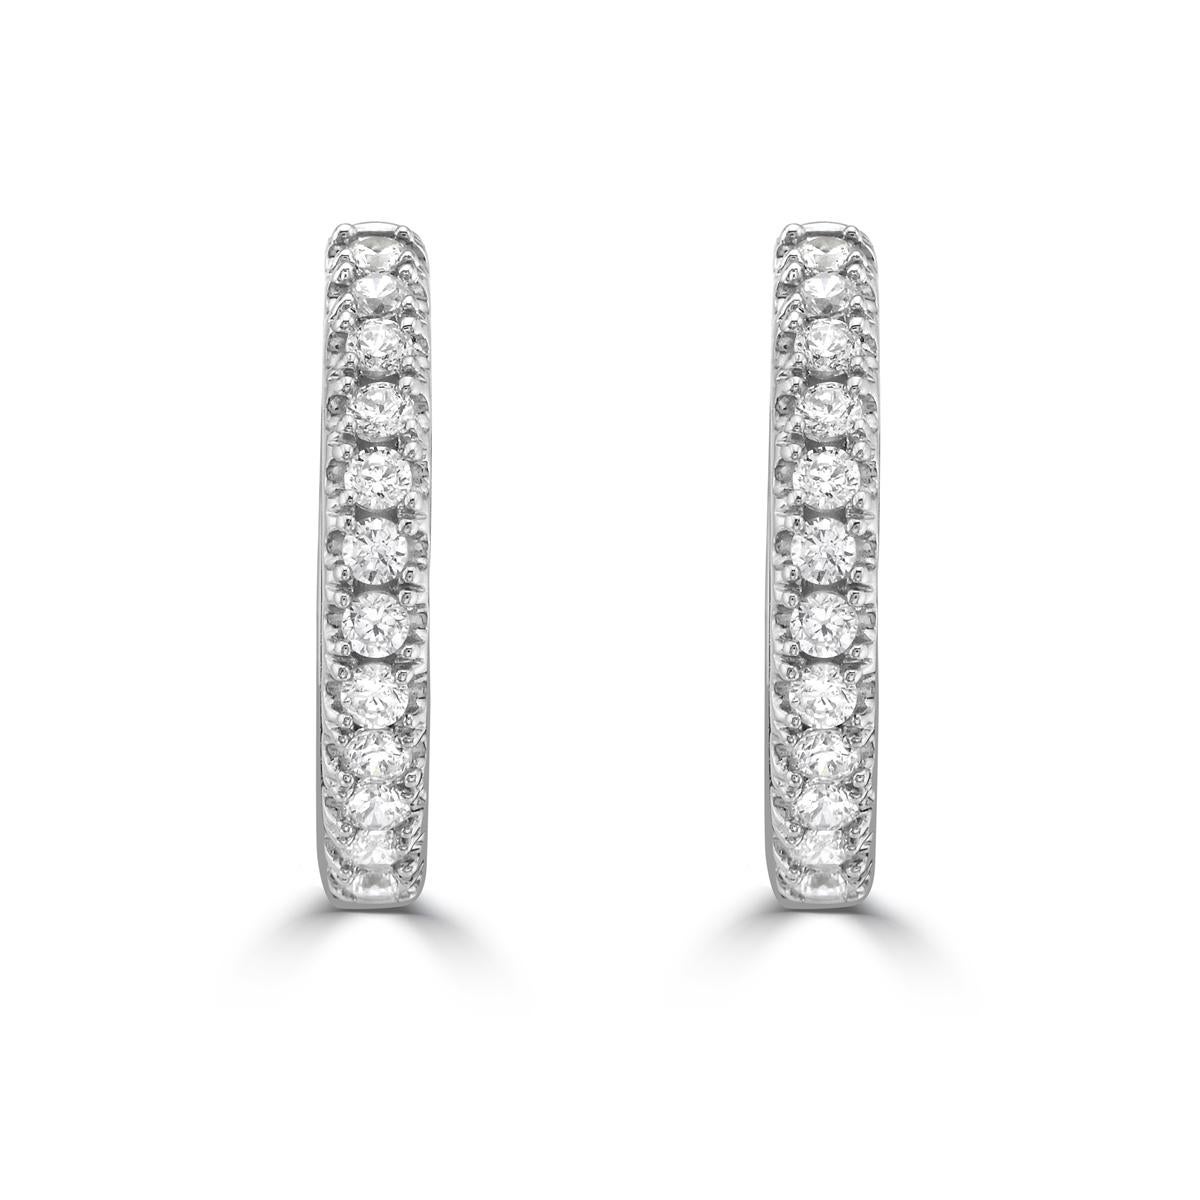 Elevate your everyday style with this diamond and 14k gold huggie hoop earrings. As the perfect piece to wear every day, these diamond huggies are an Essential for your jewelry collection. These huggies are a classic design with standout diamonds